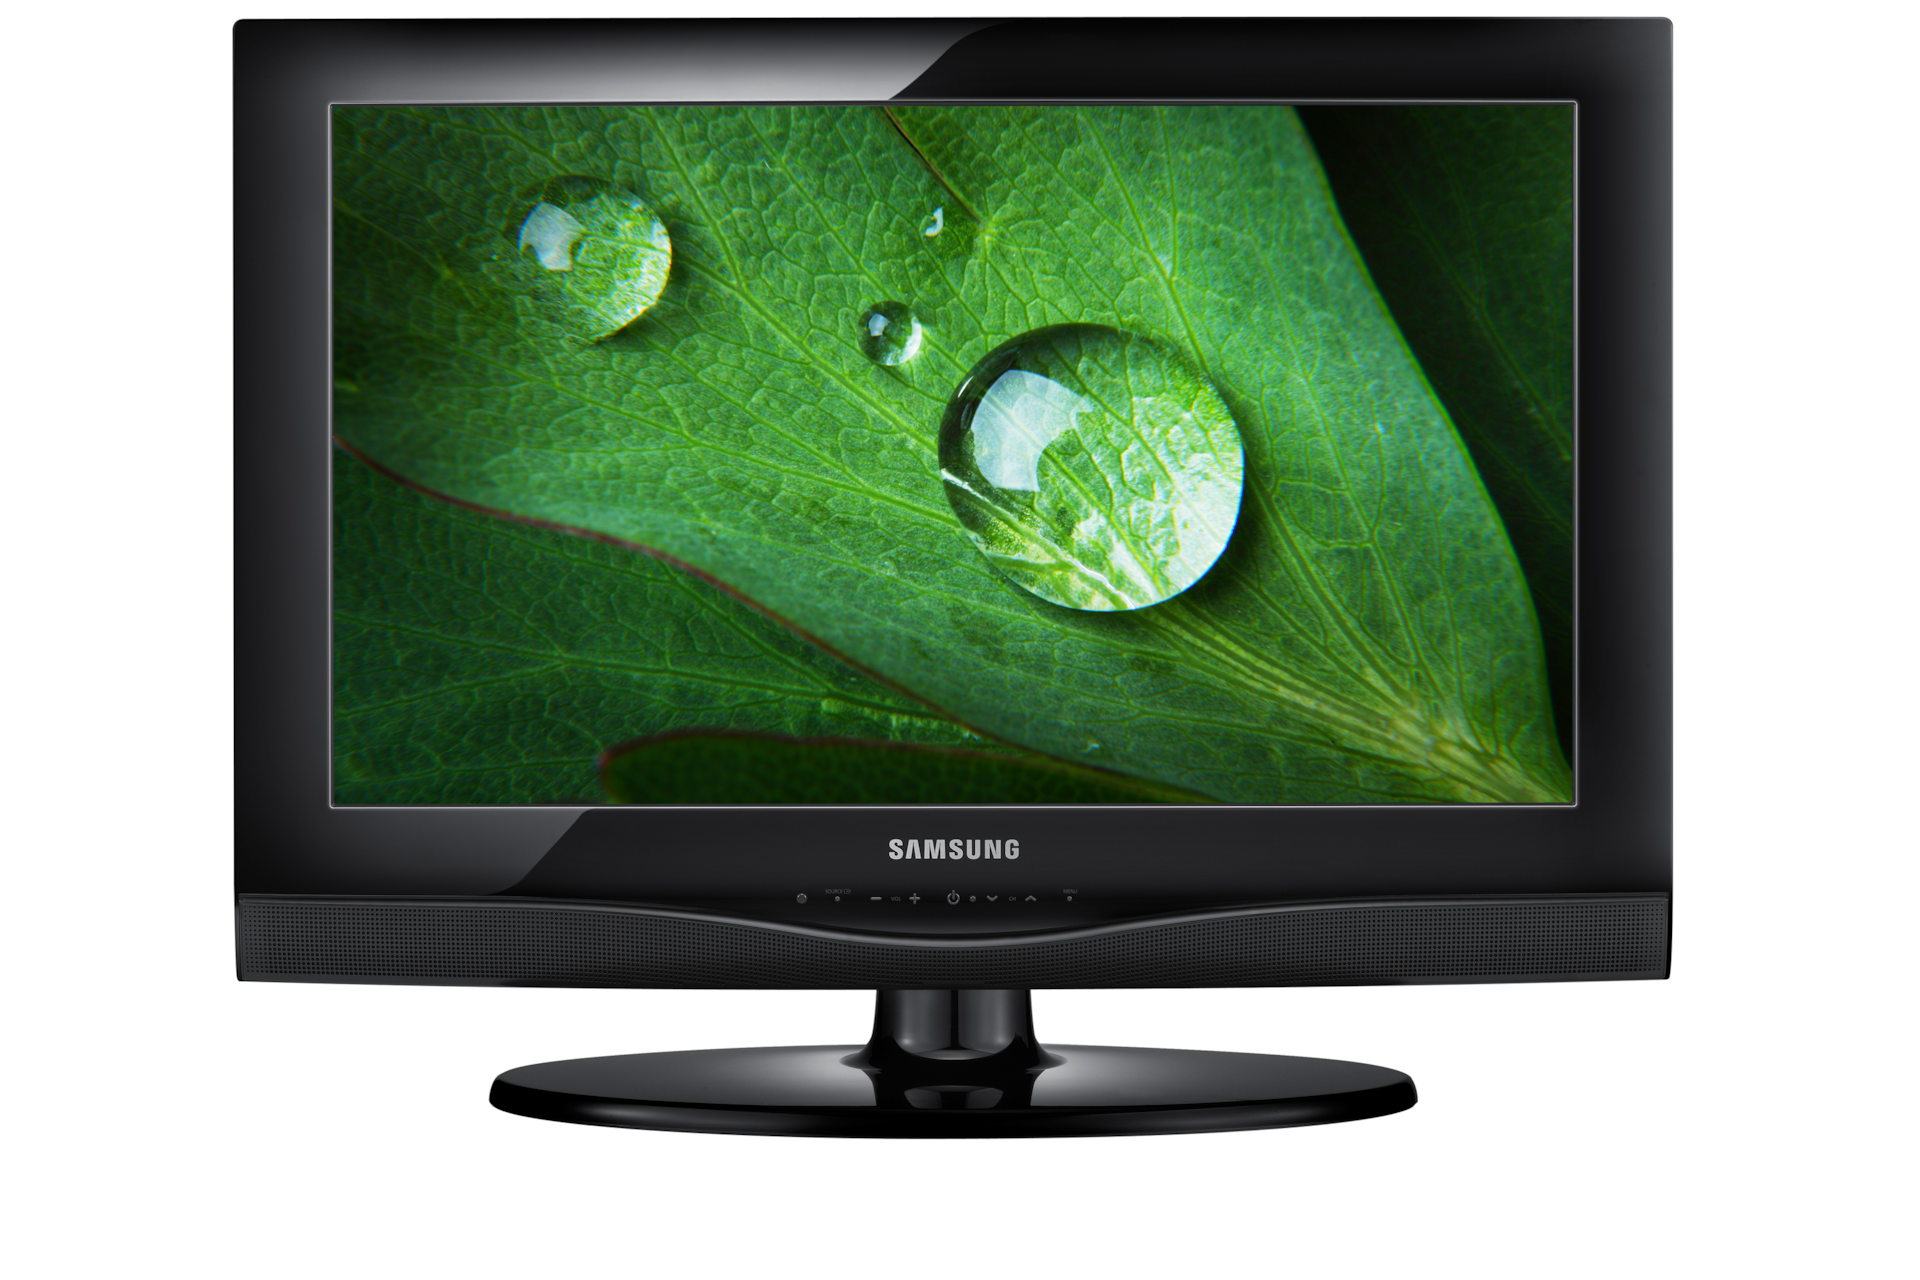 nakoming Lagere school onthouden LE26C350 LCD-TV 26" | Samsung Service NL